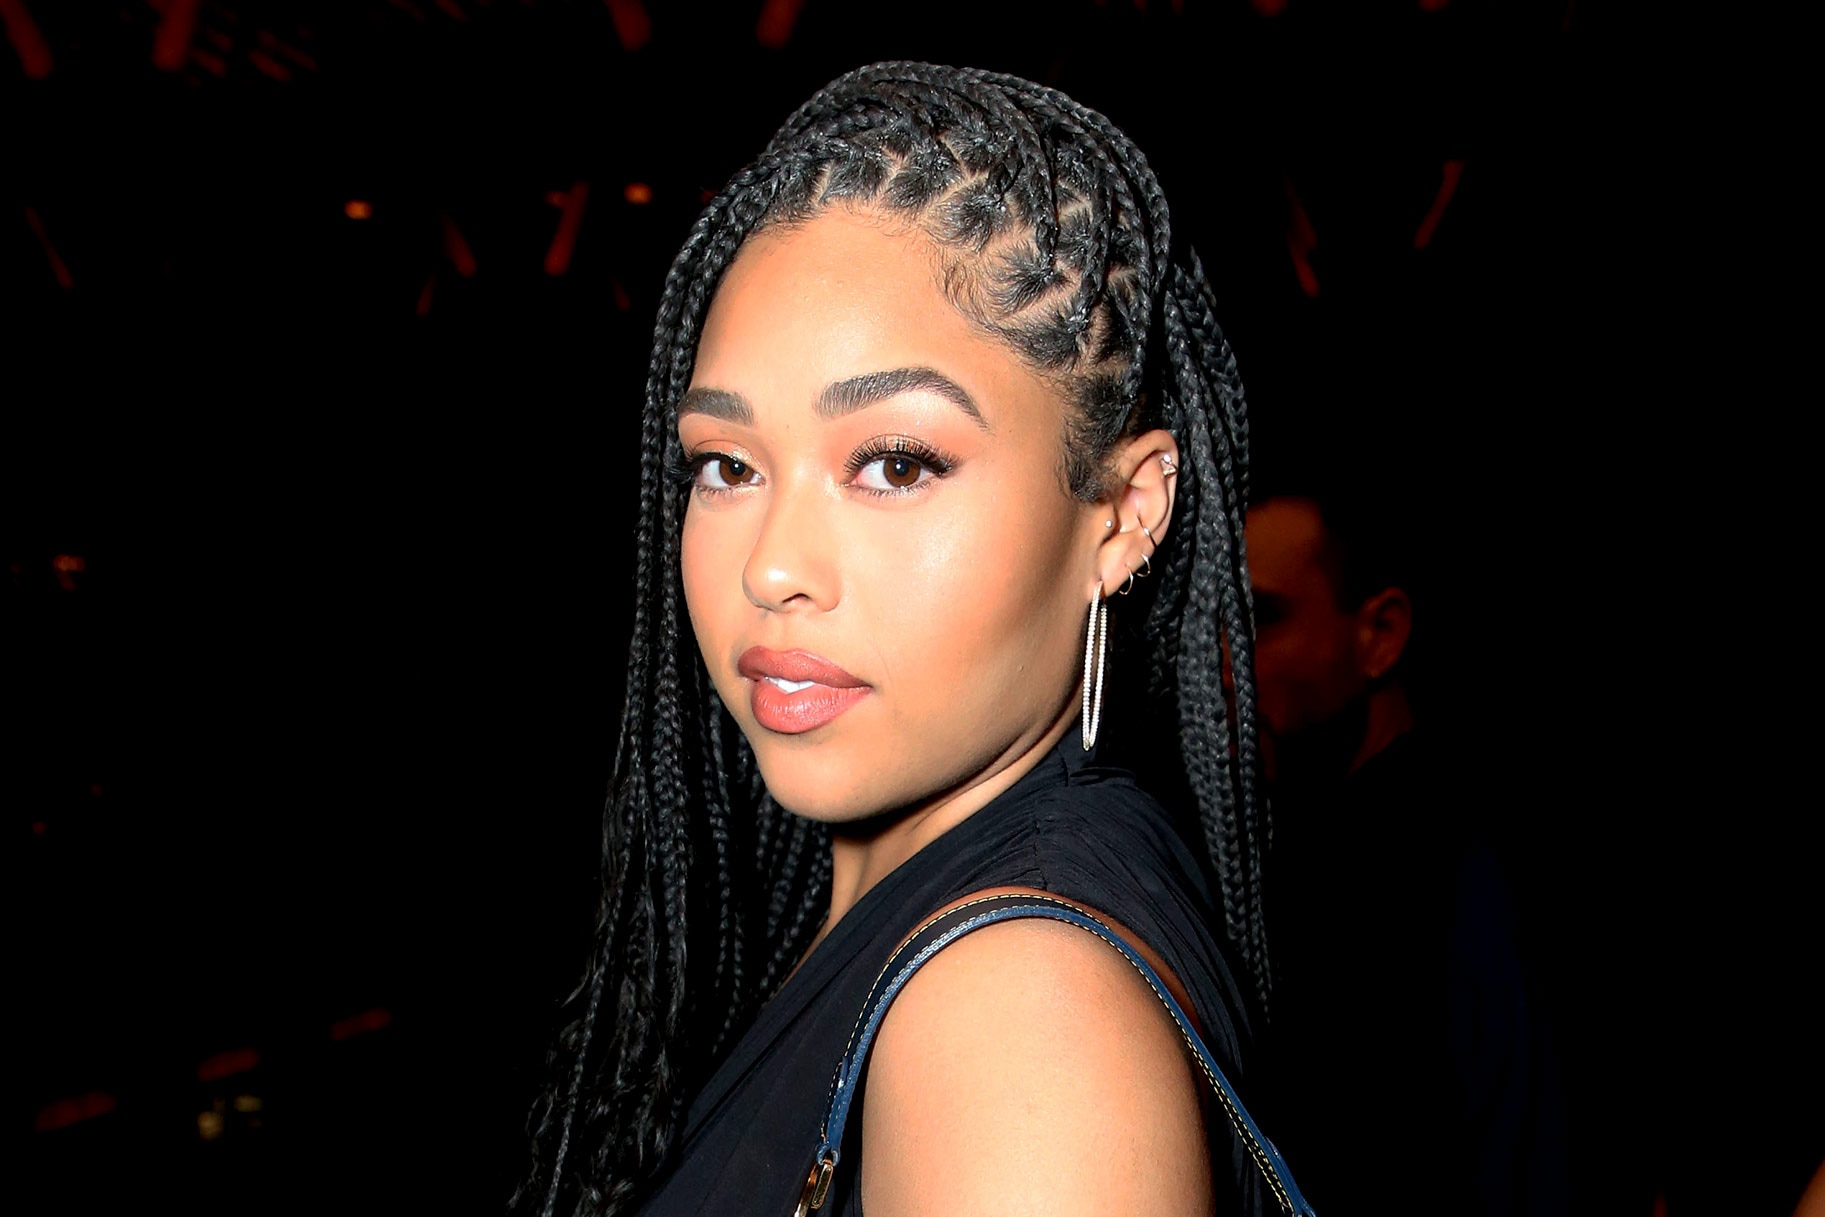 Kylie Jenner's ex-BFF Jordyn Woods to launch clothing line